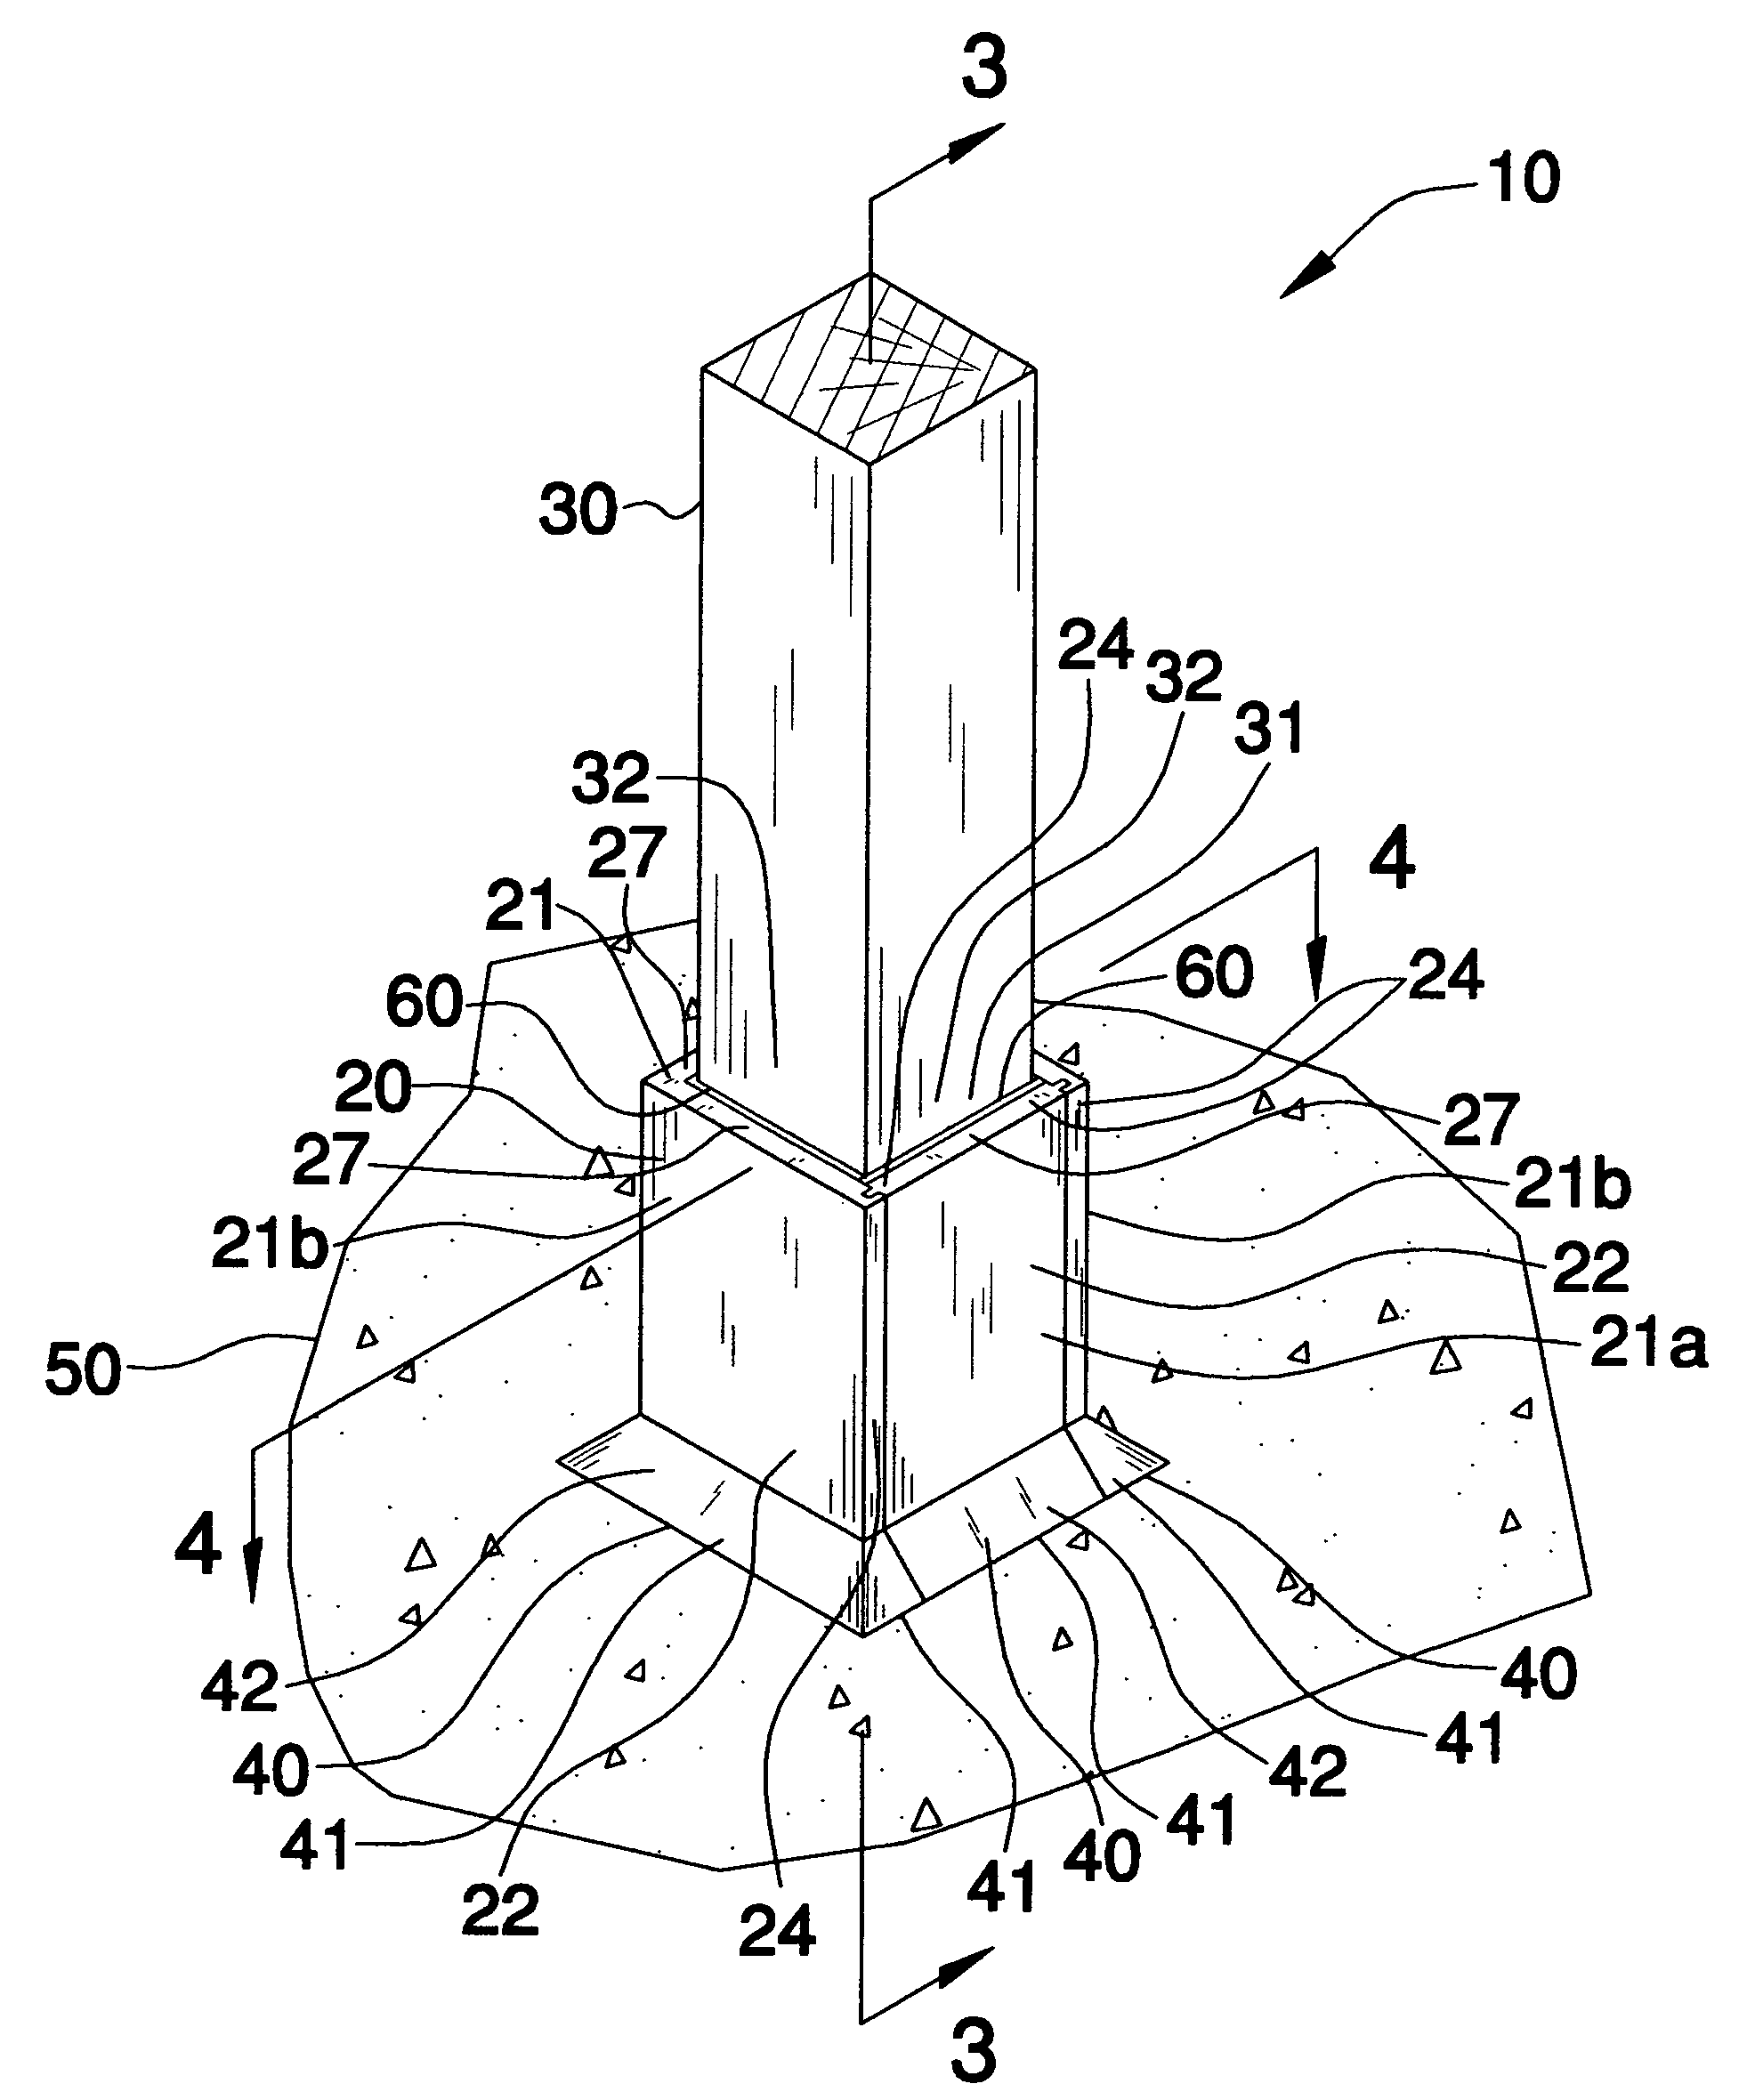 Fence post protecting apparatus